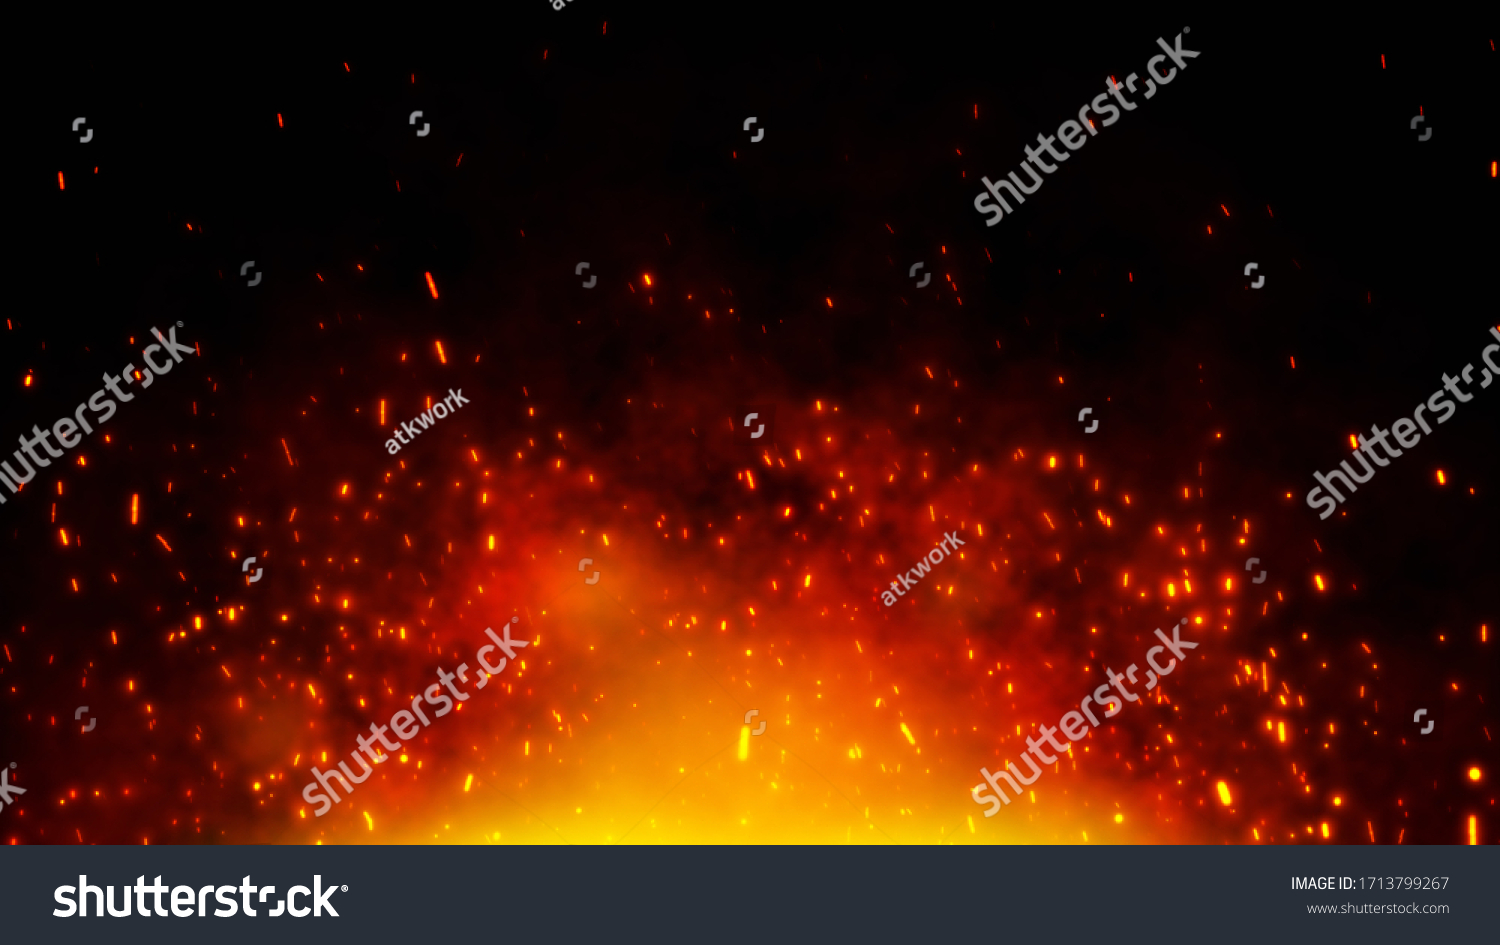 Fire embers particles over black background. Fire sparks background. Abstract dark glitter fire particles lights. #1713799267